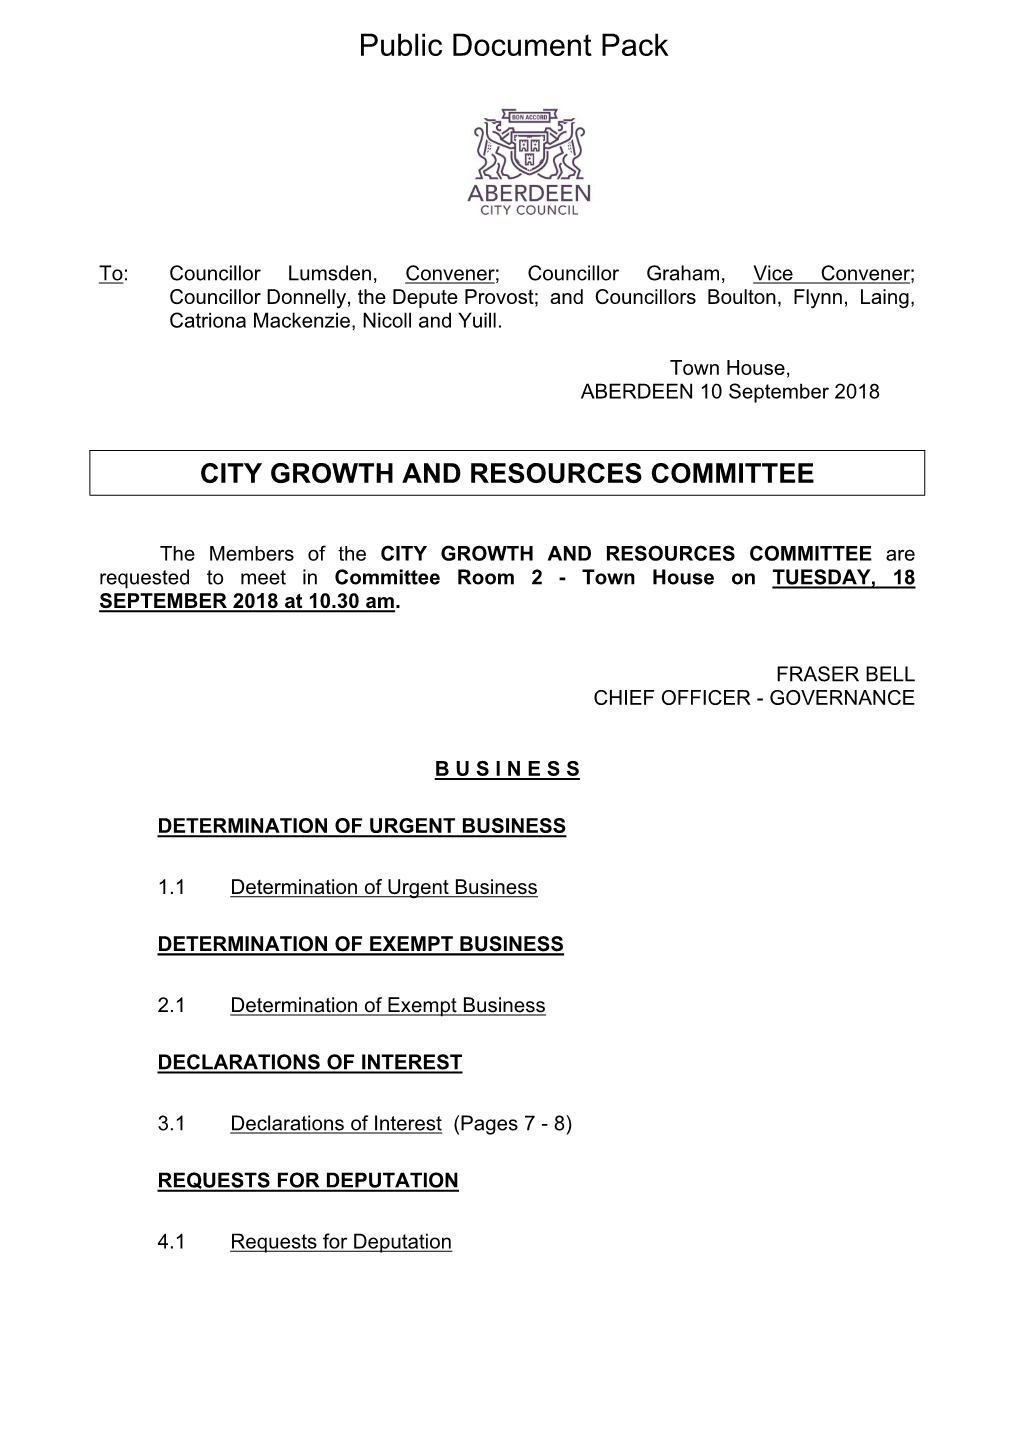 (Public Pack)Agenda Document for City Growth and Resources